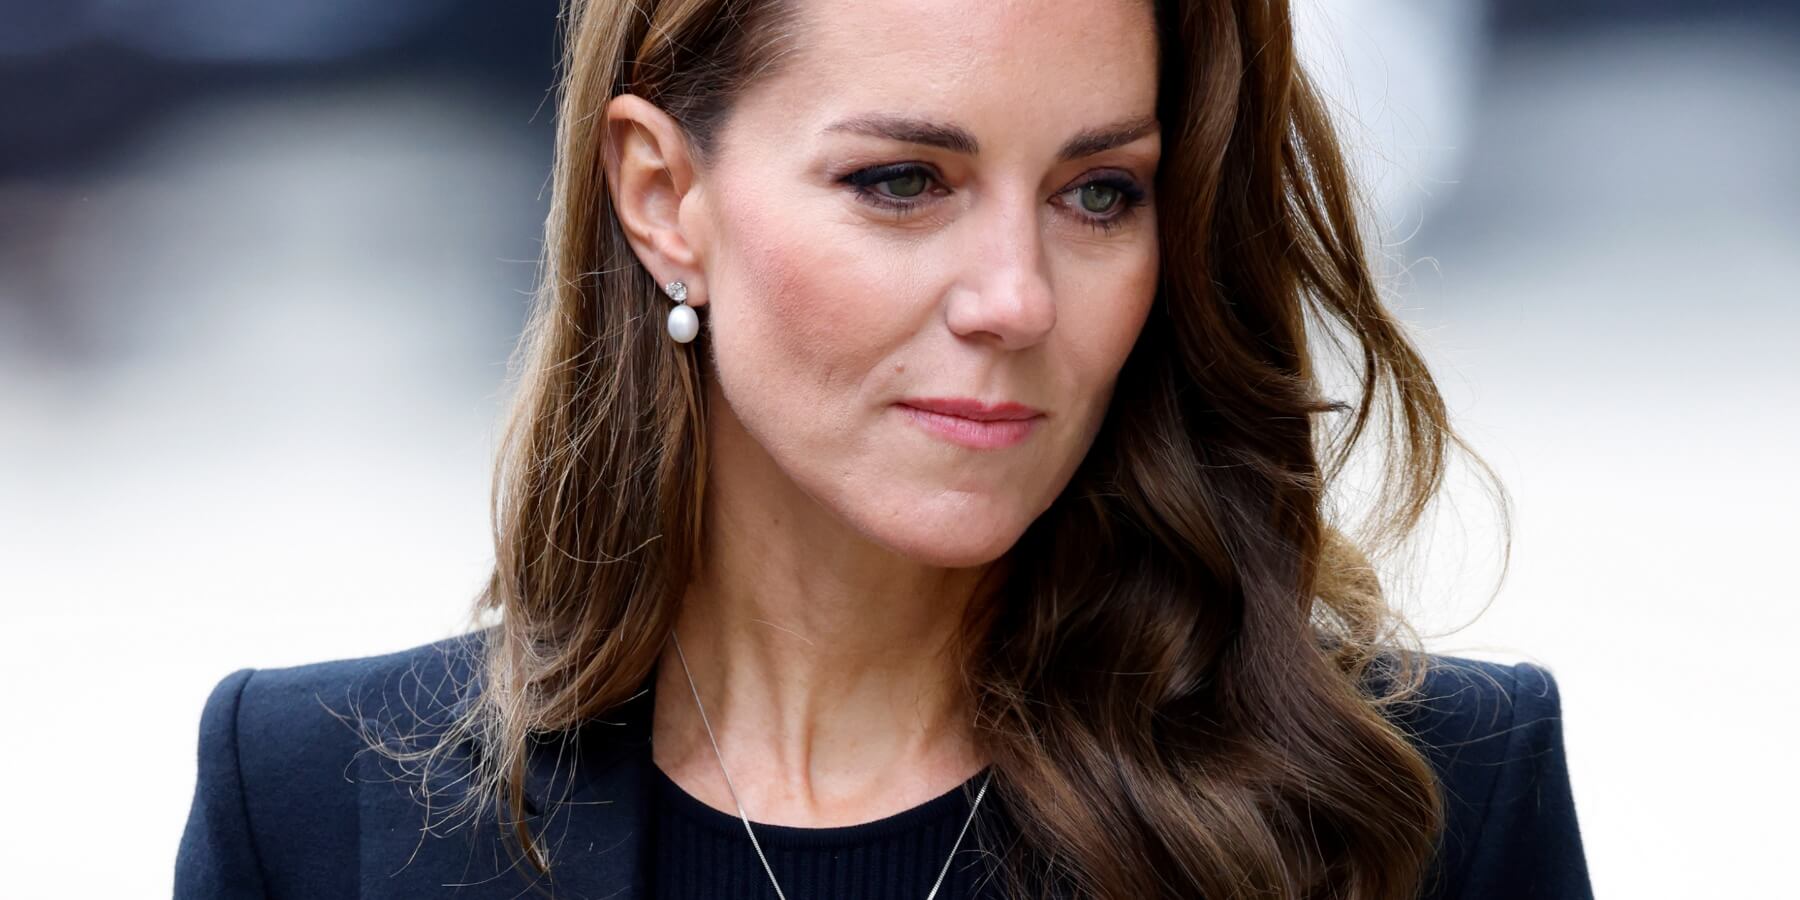 Kate Middleton's uttered six words within her cancer statement that foretold her future.